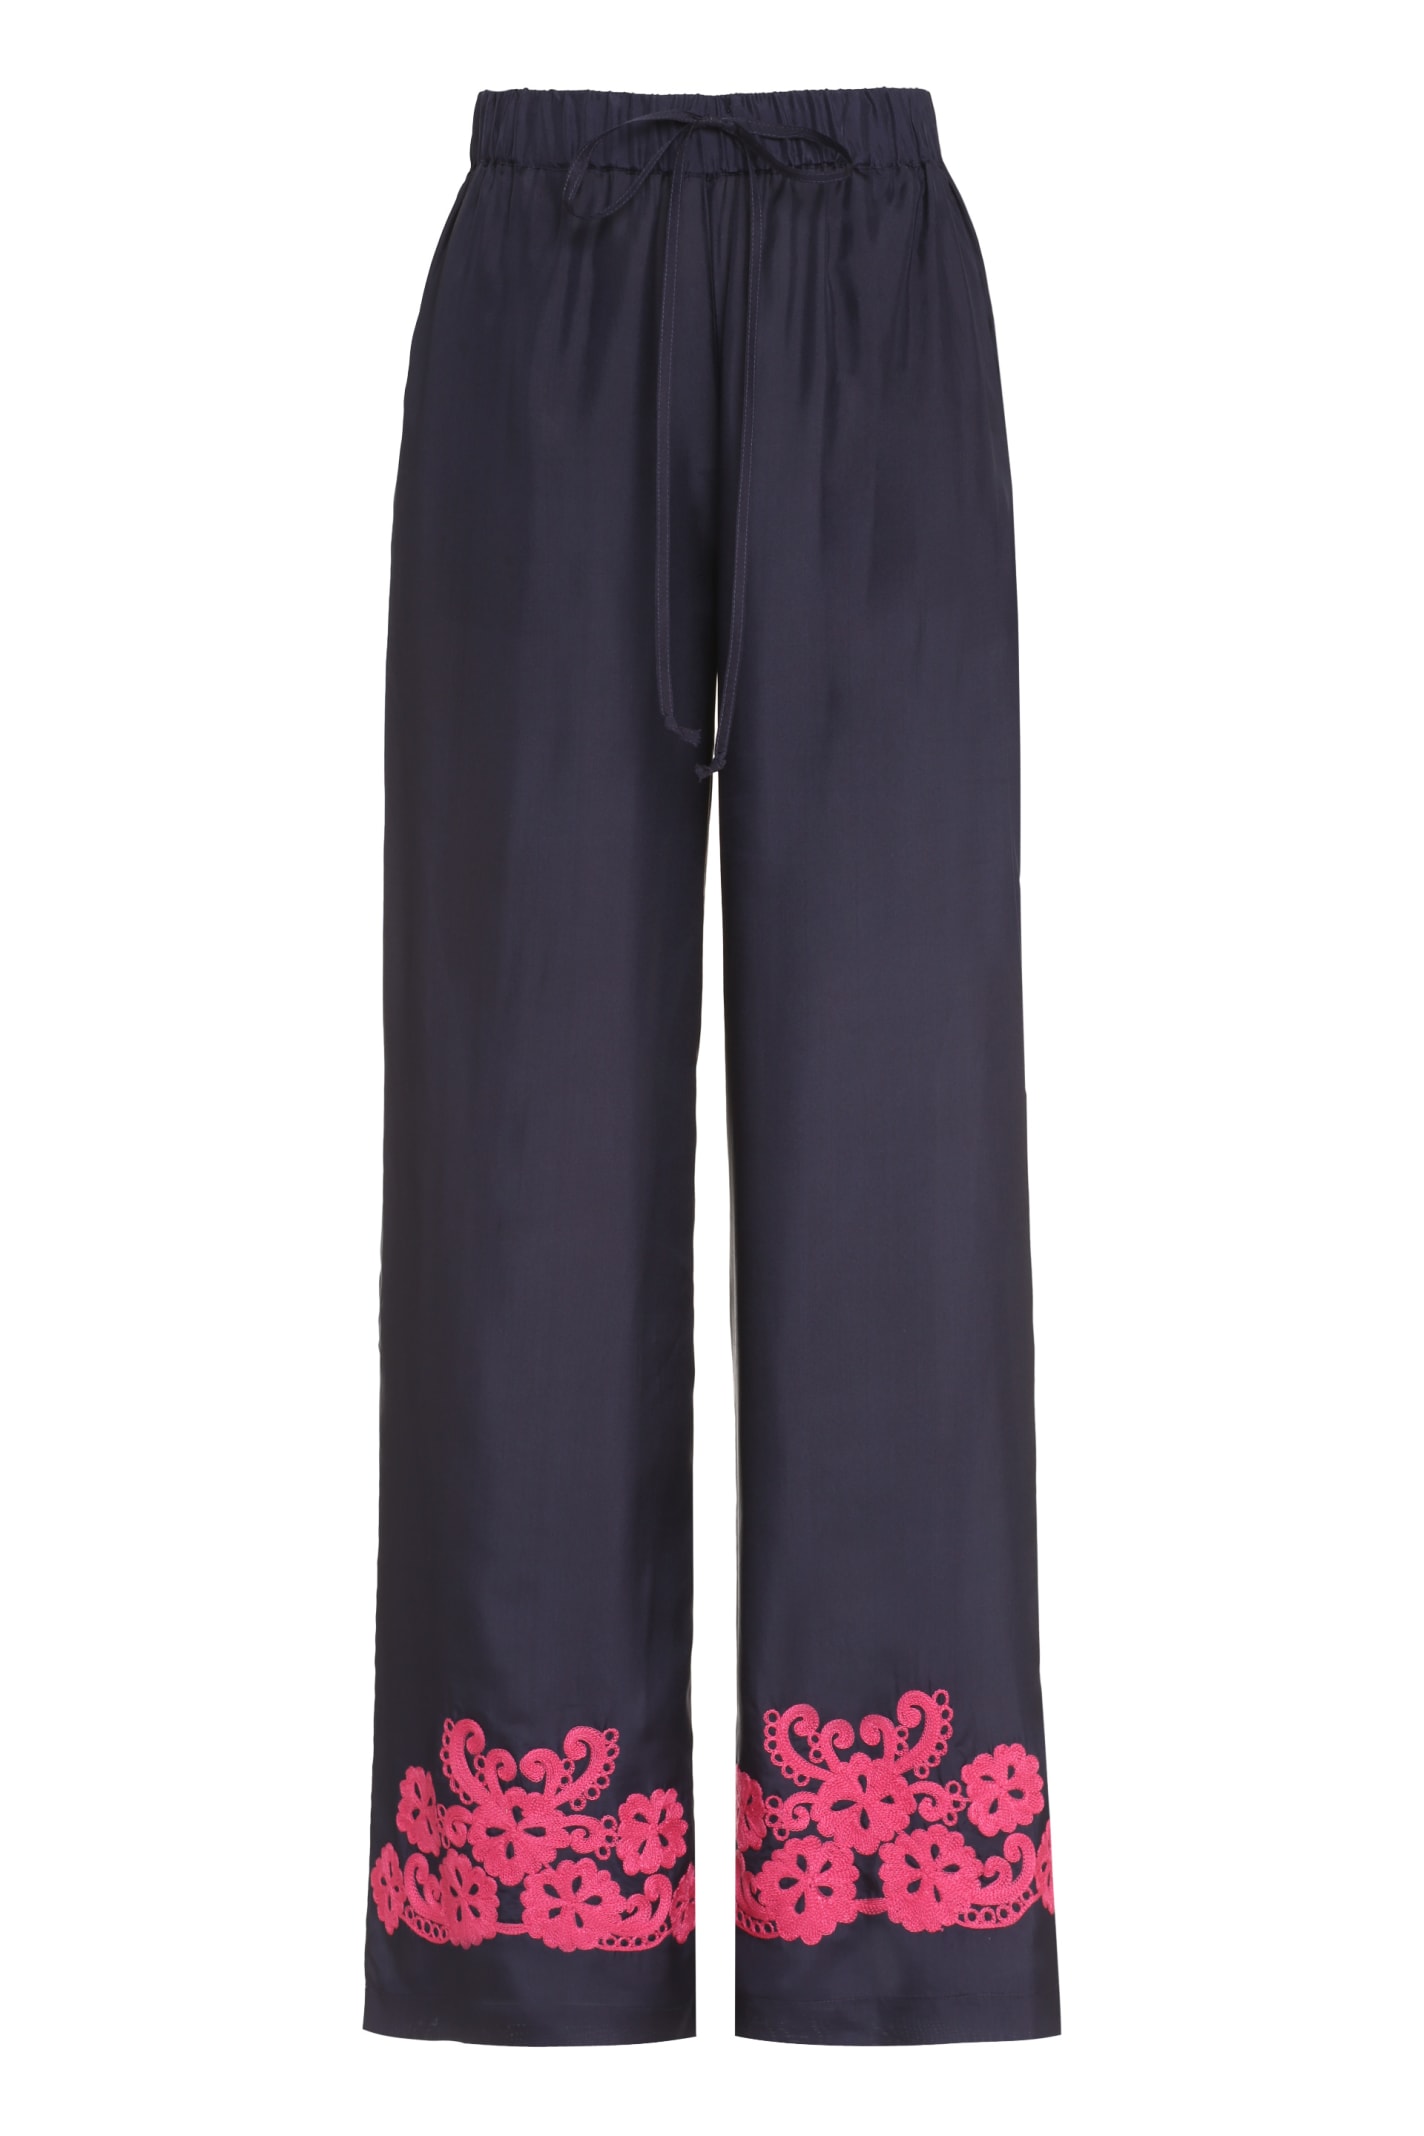 Parosh Embroidered Silk Trousers